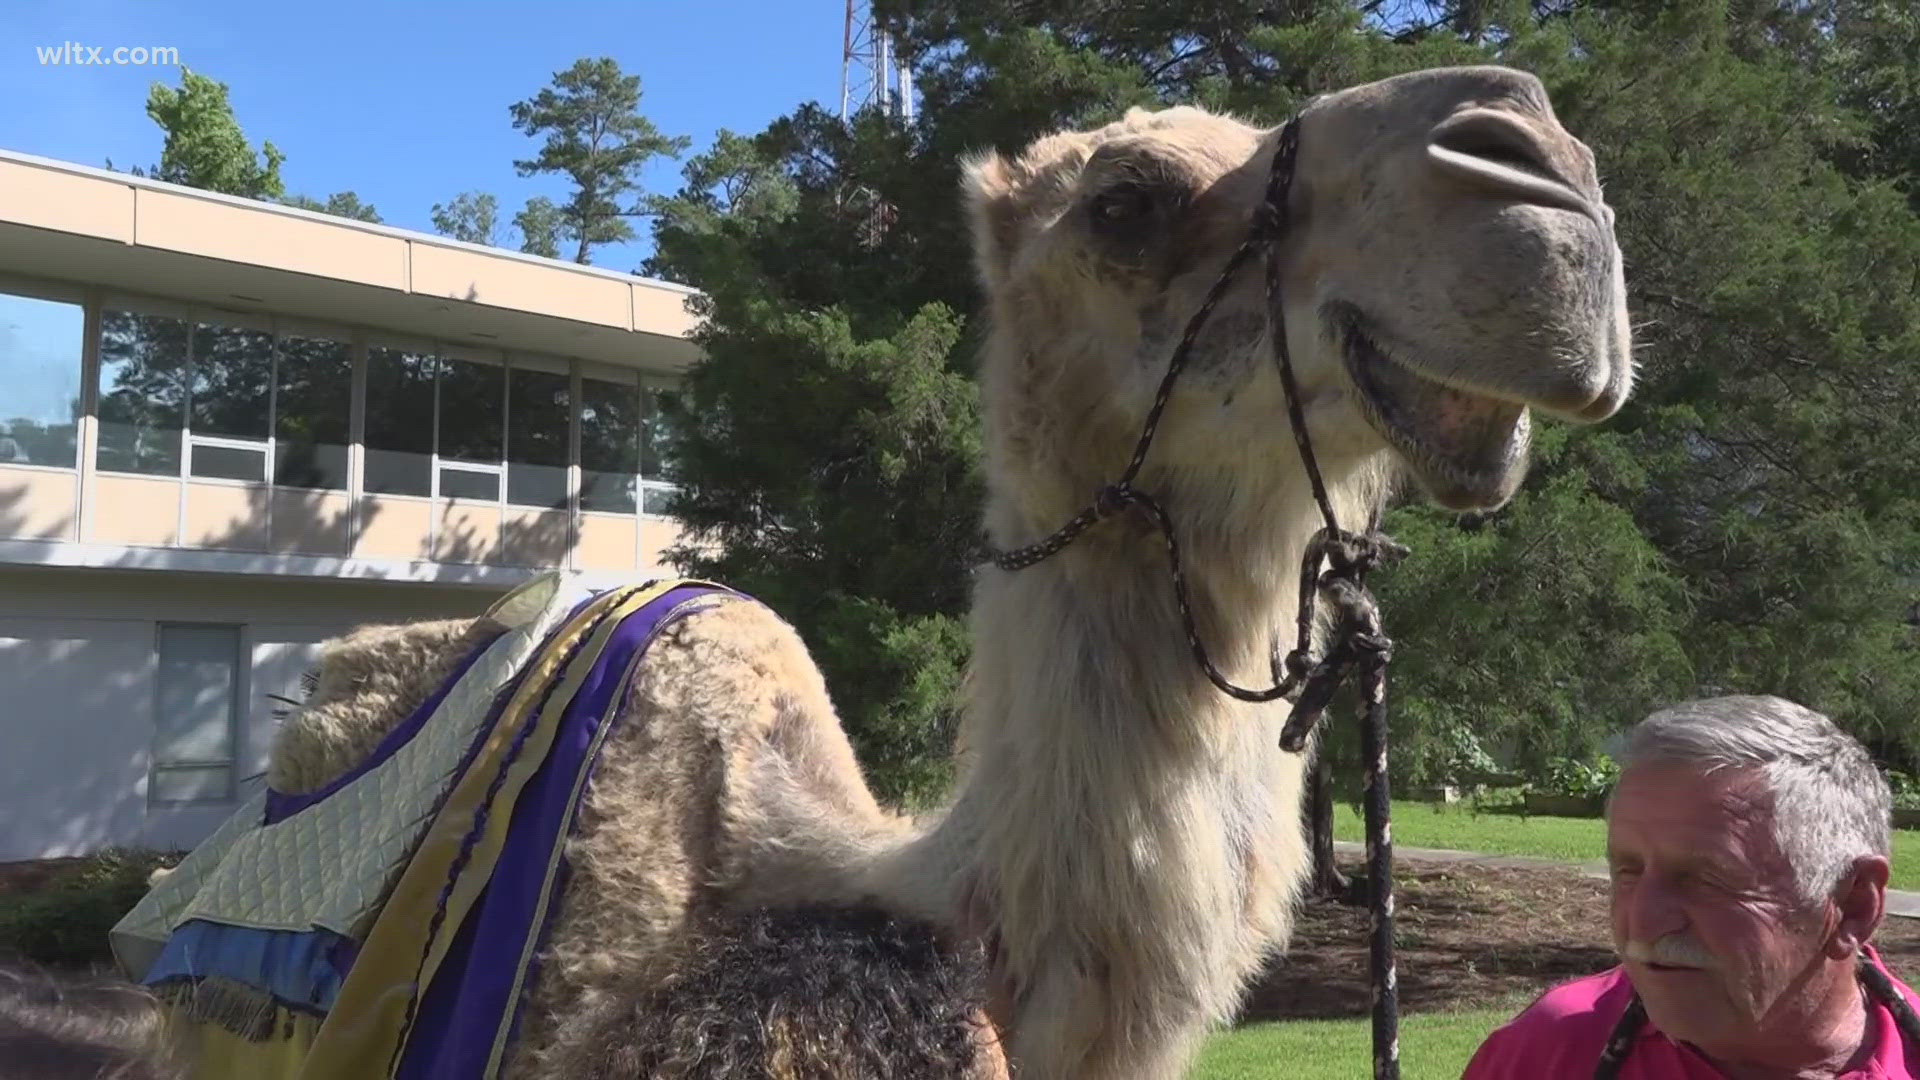 In honor of National Camel Day, News19 invited local Lexington County celebrity Abraham the Camel to celebrate and show us his favorite treat